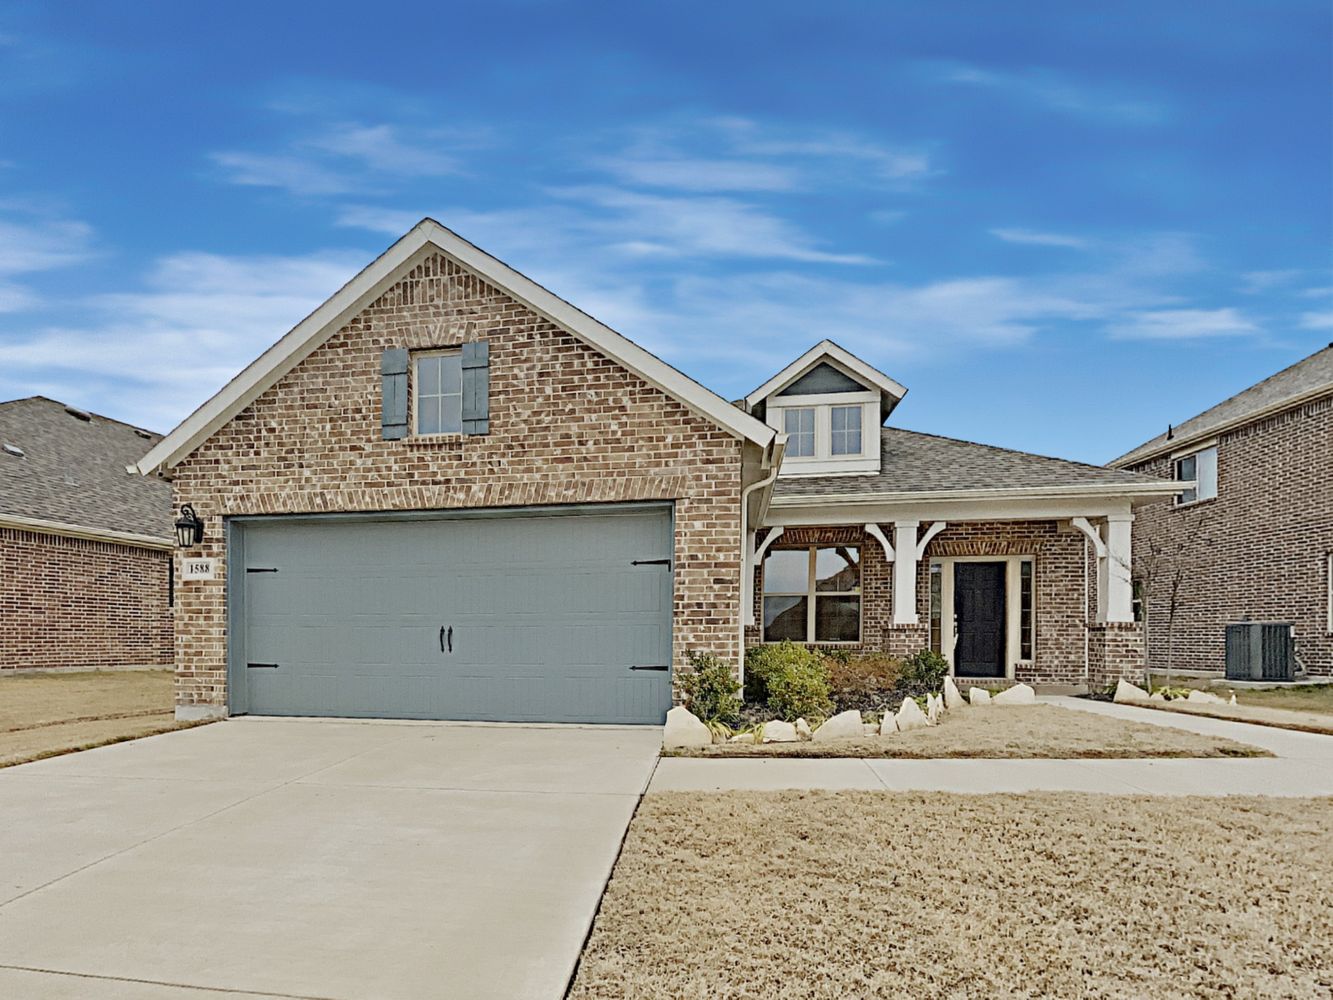 Inviting home with a covered porch and two-car garage at Invitation Homes Dallas.